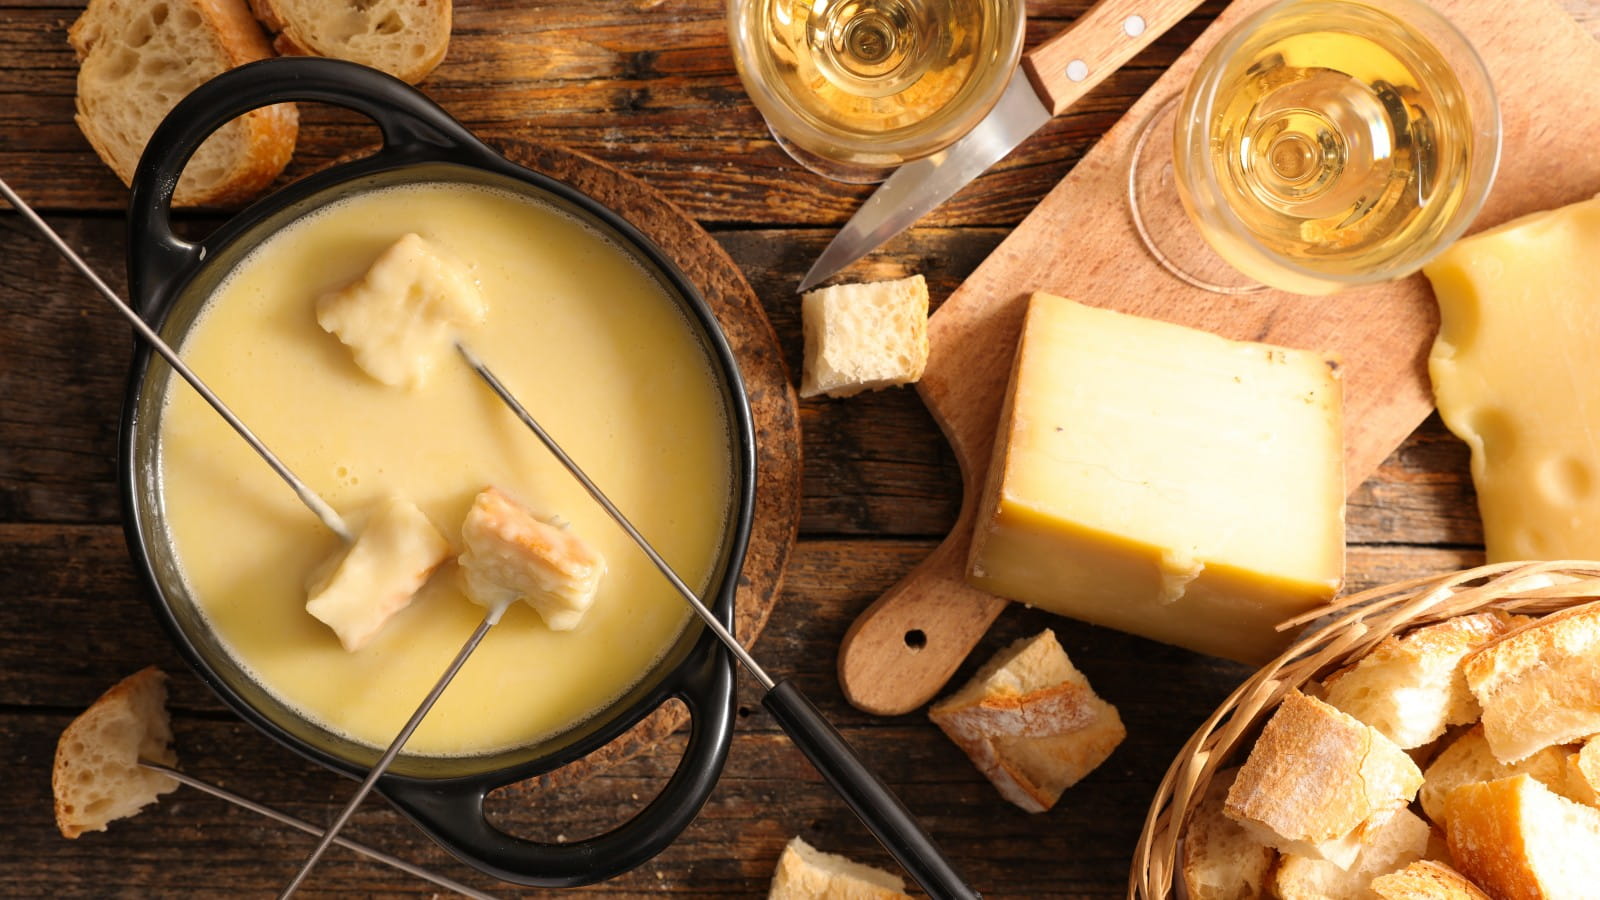 A foolproof cheese fondue